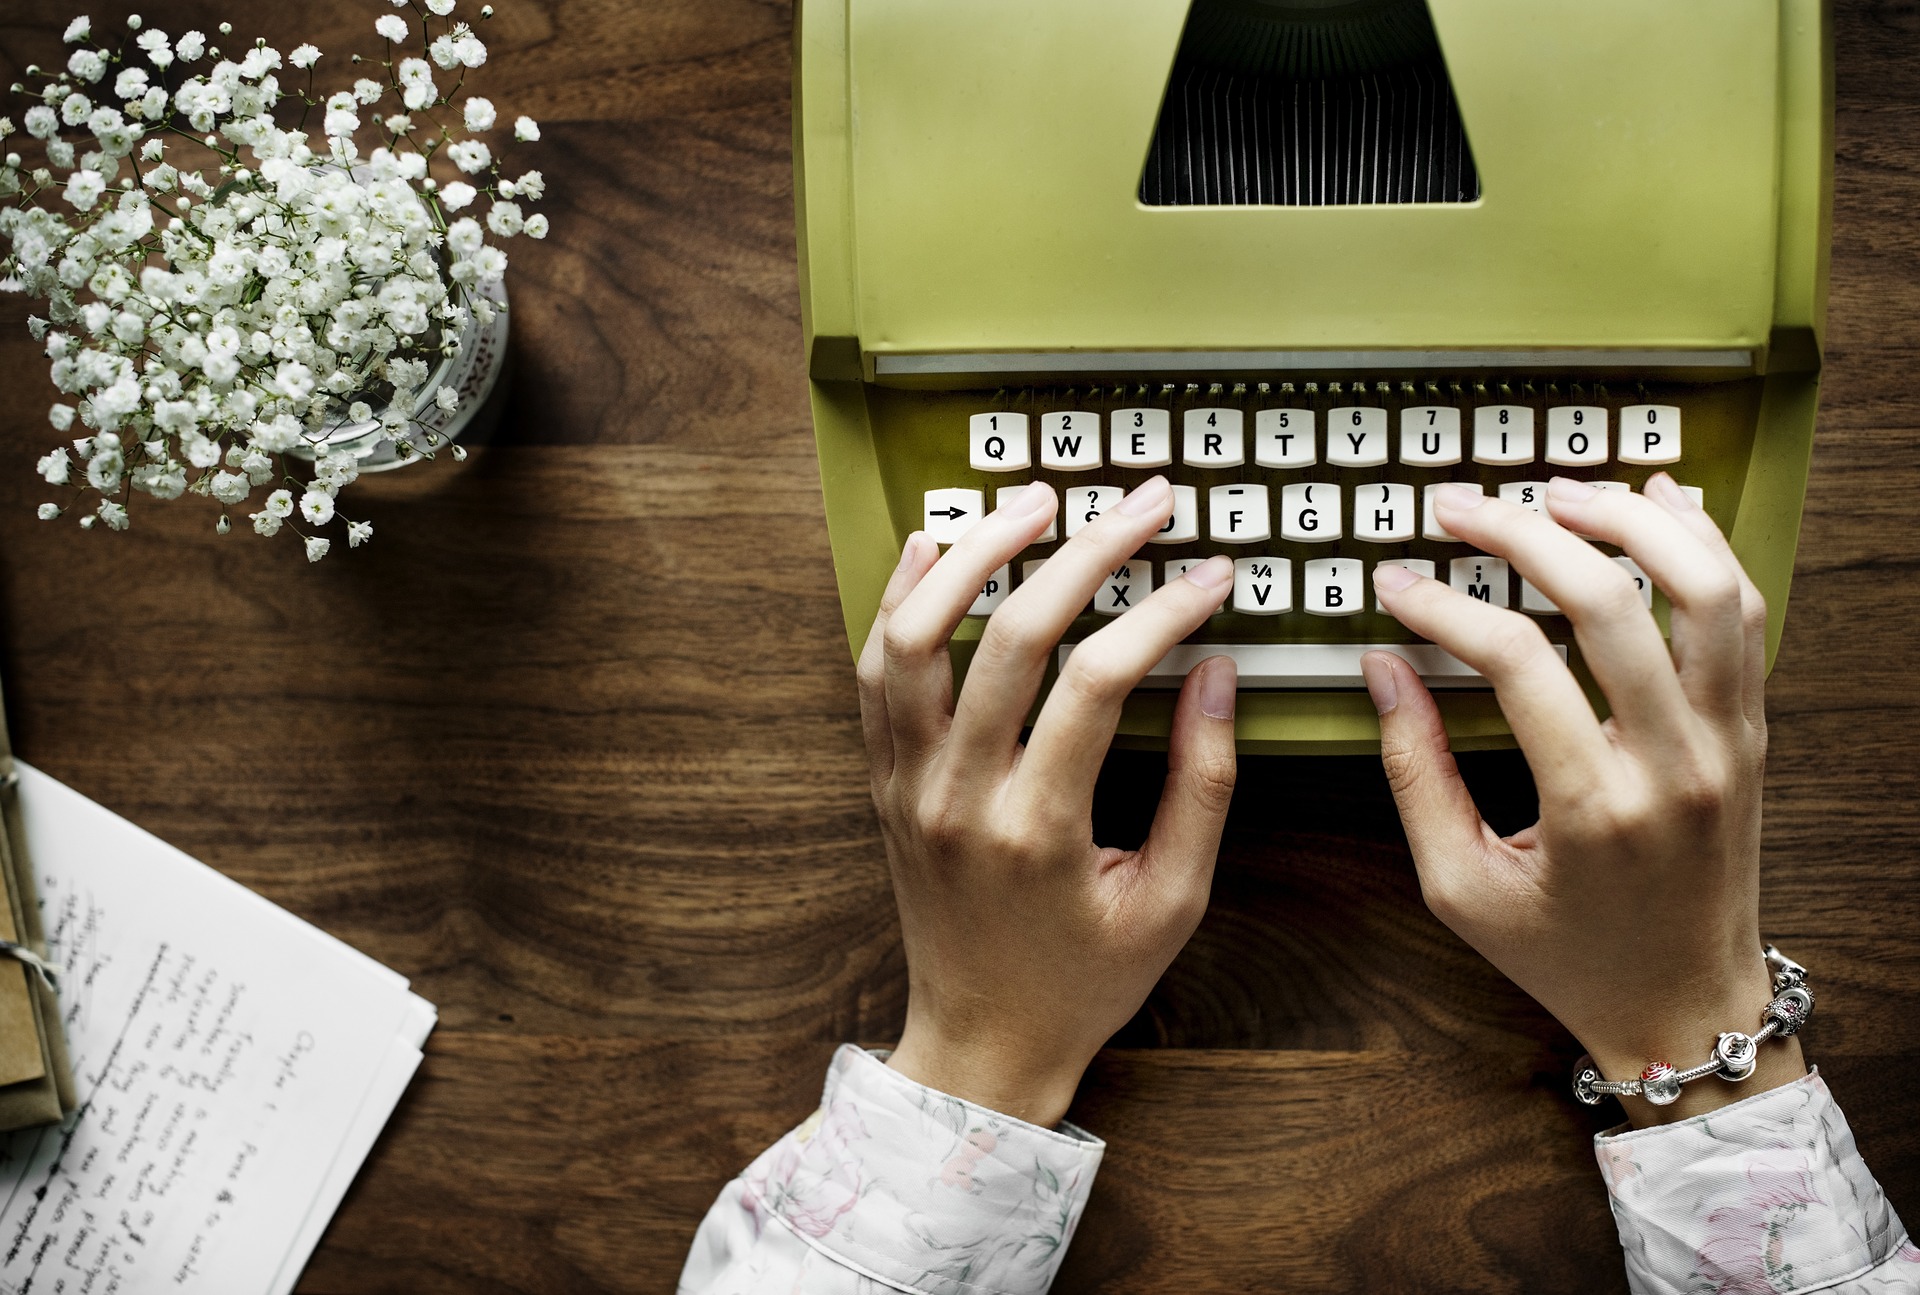 a person's hands poised at a typewriter and a container of flowers and written pages